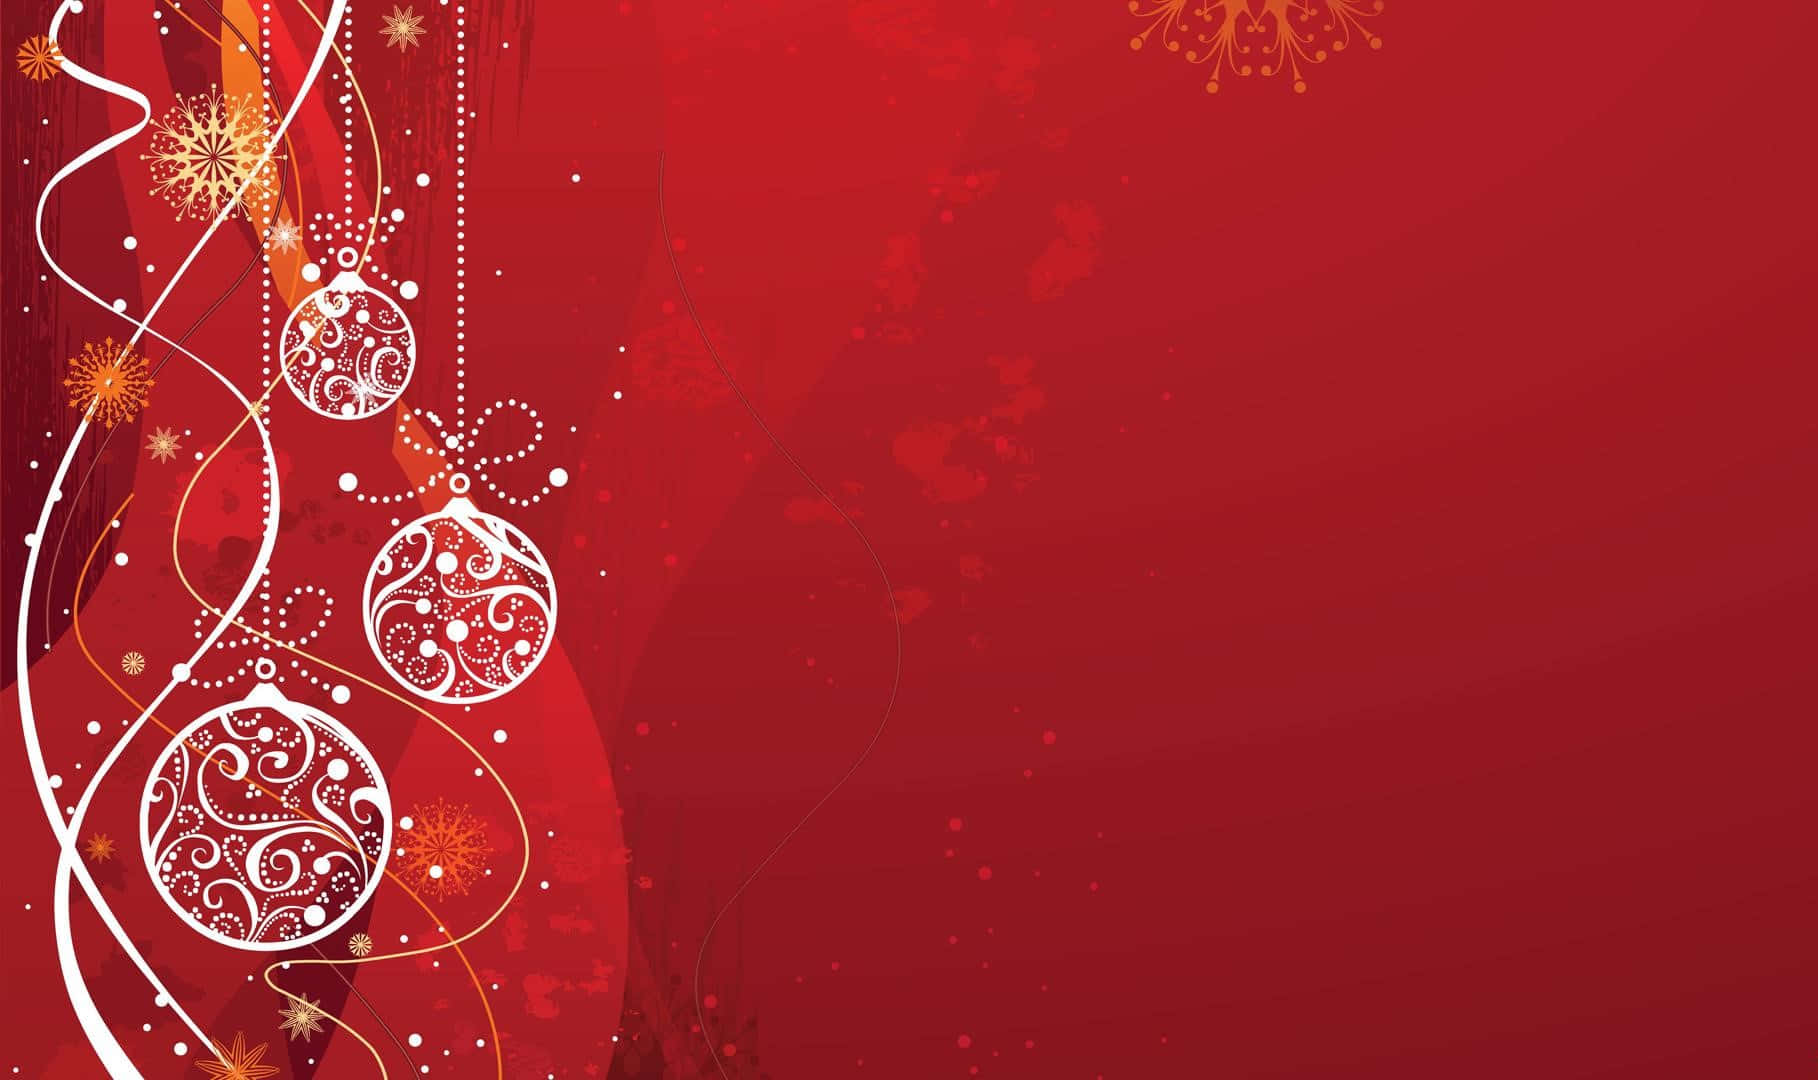 Make this Red Aesthetic Christmas unforgettably magical! Wallpaper